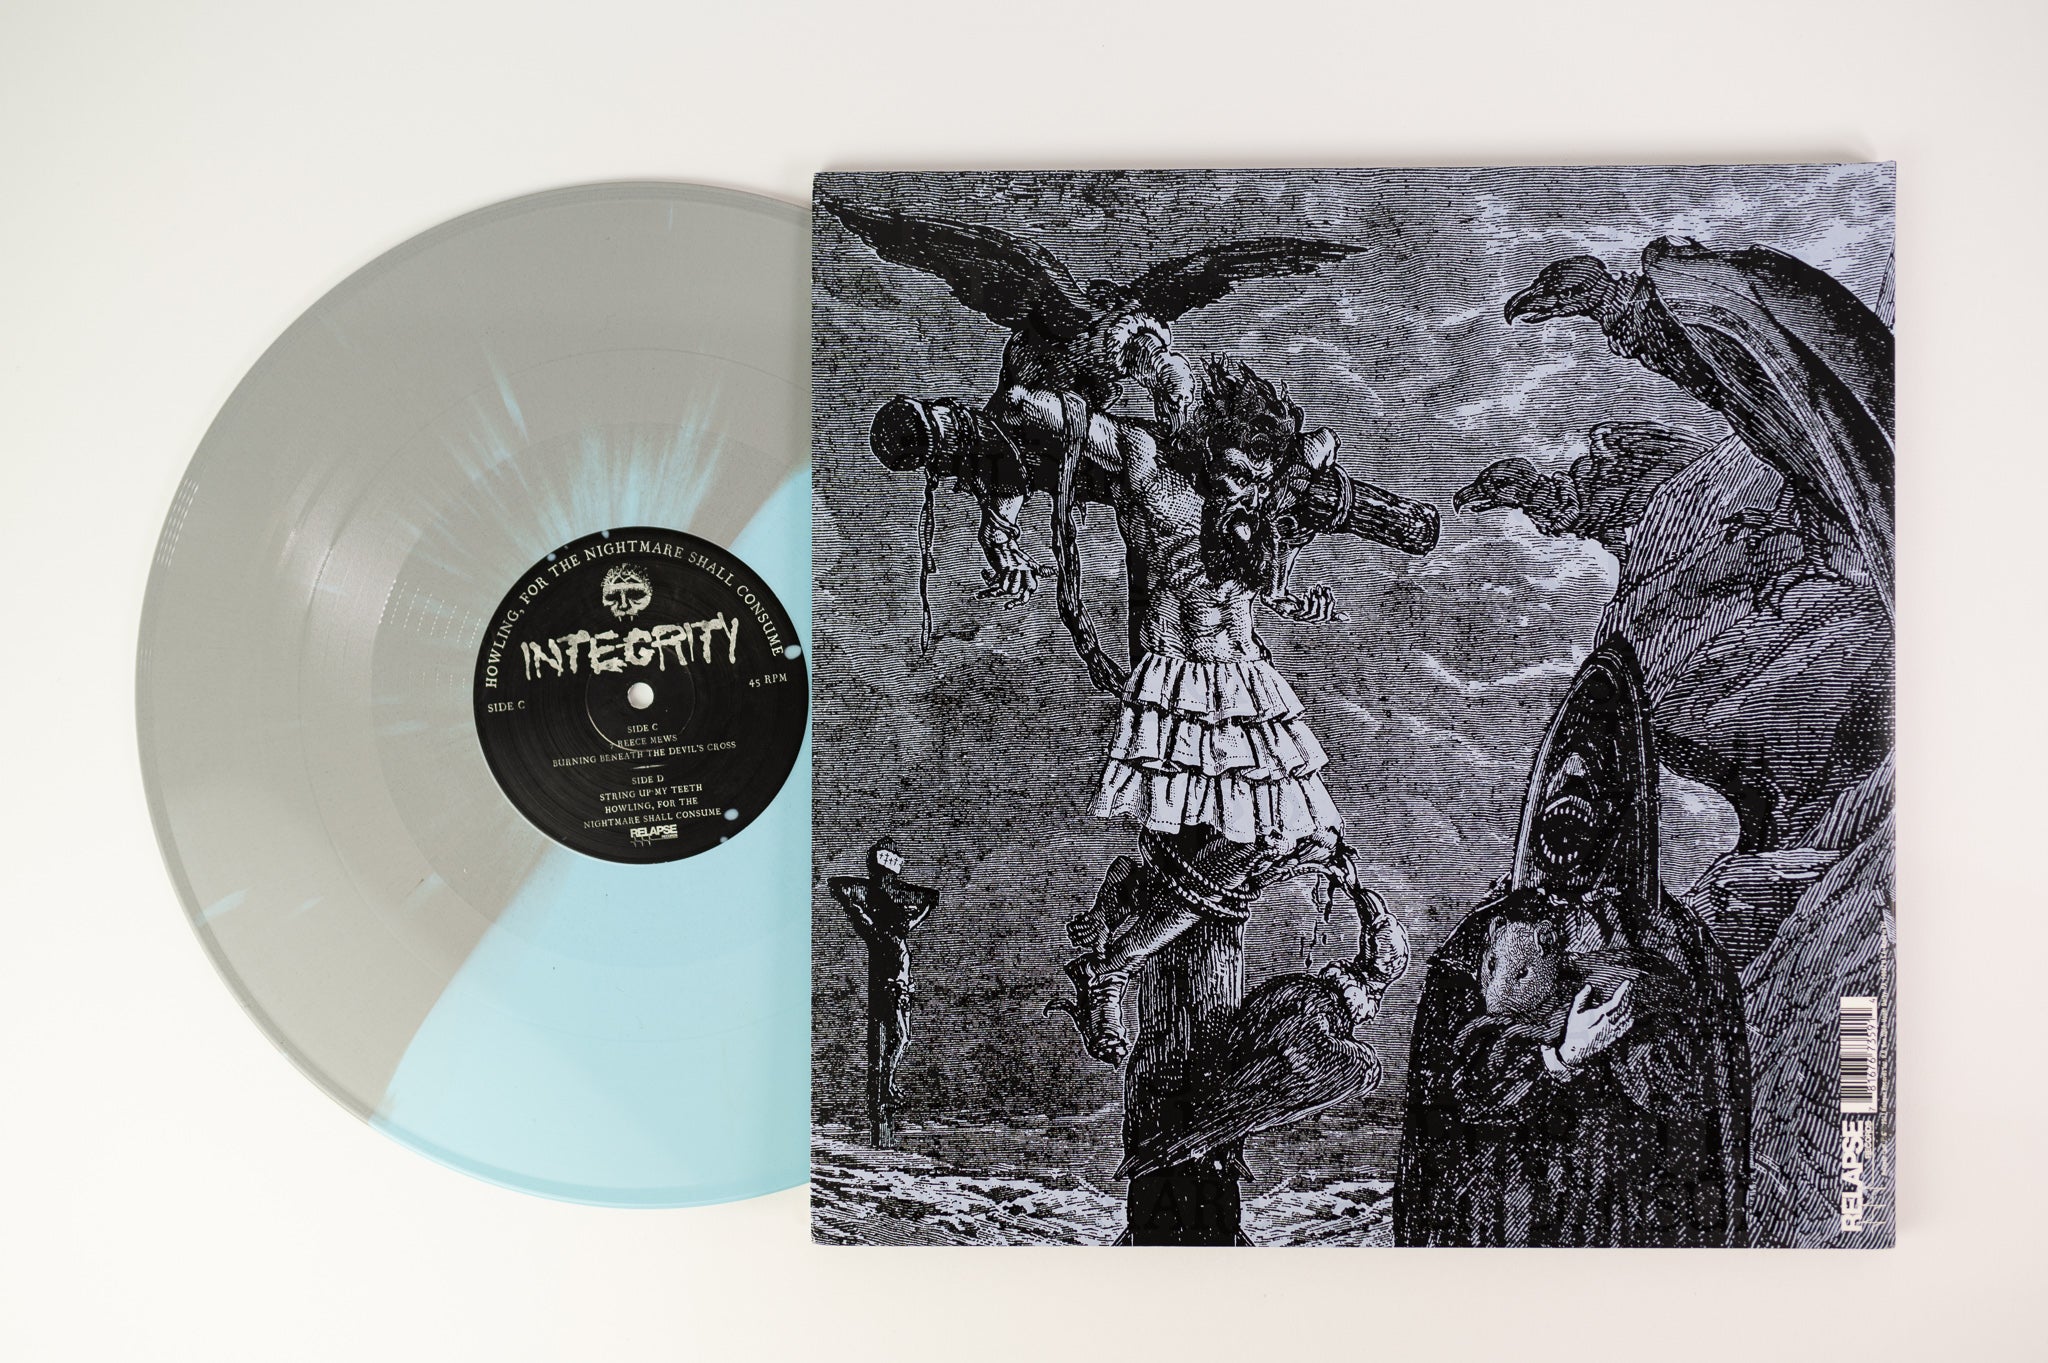 Integrity - Howling For The Nightmare Shall Consume on Relapse - Colored Vinyl